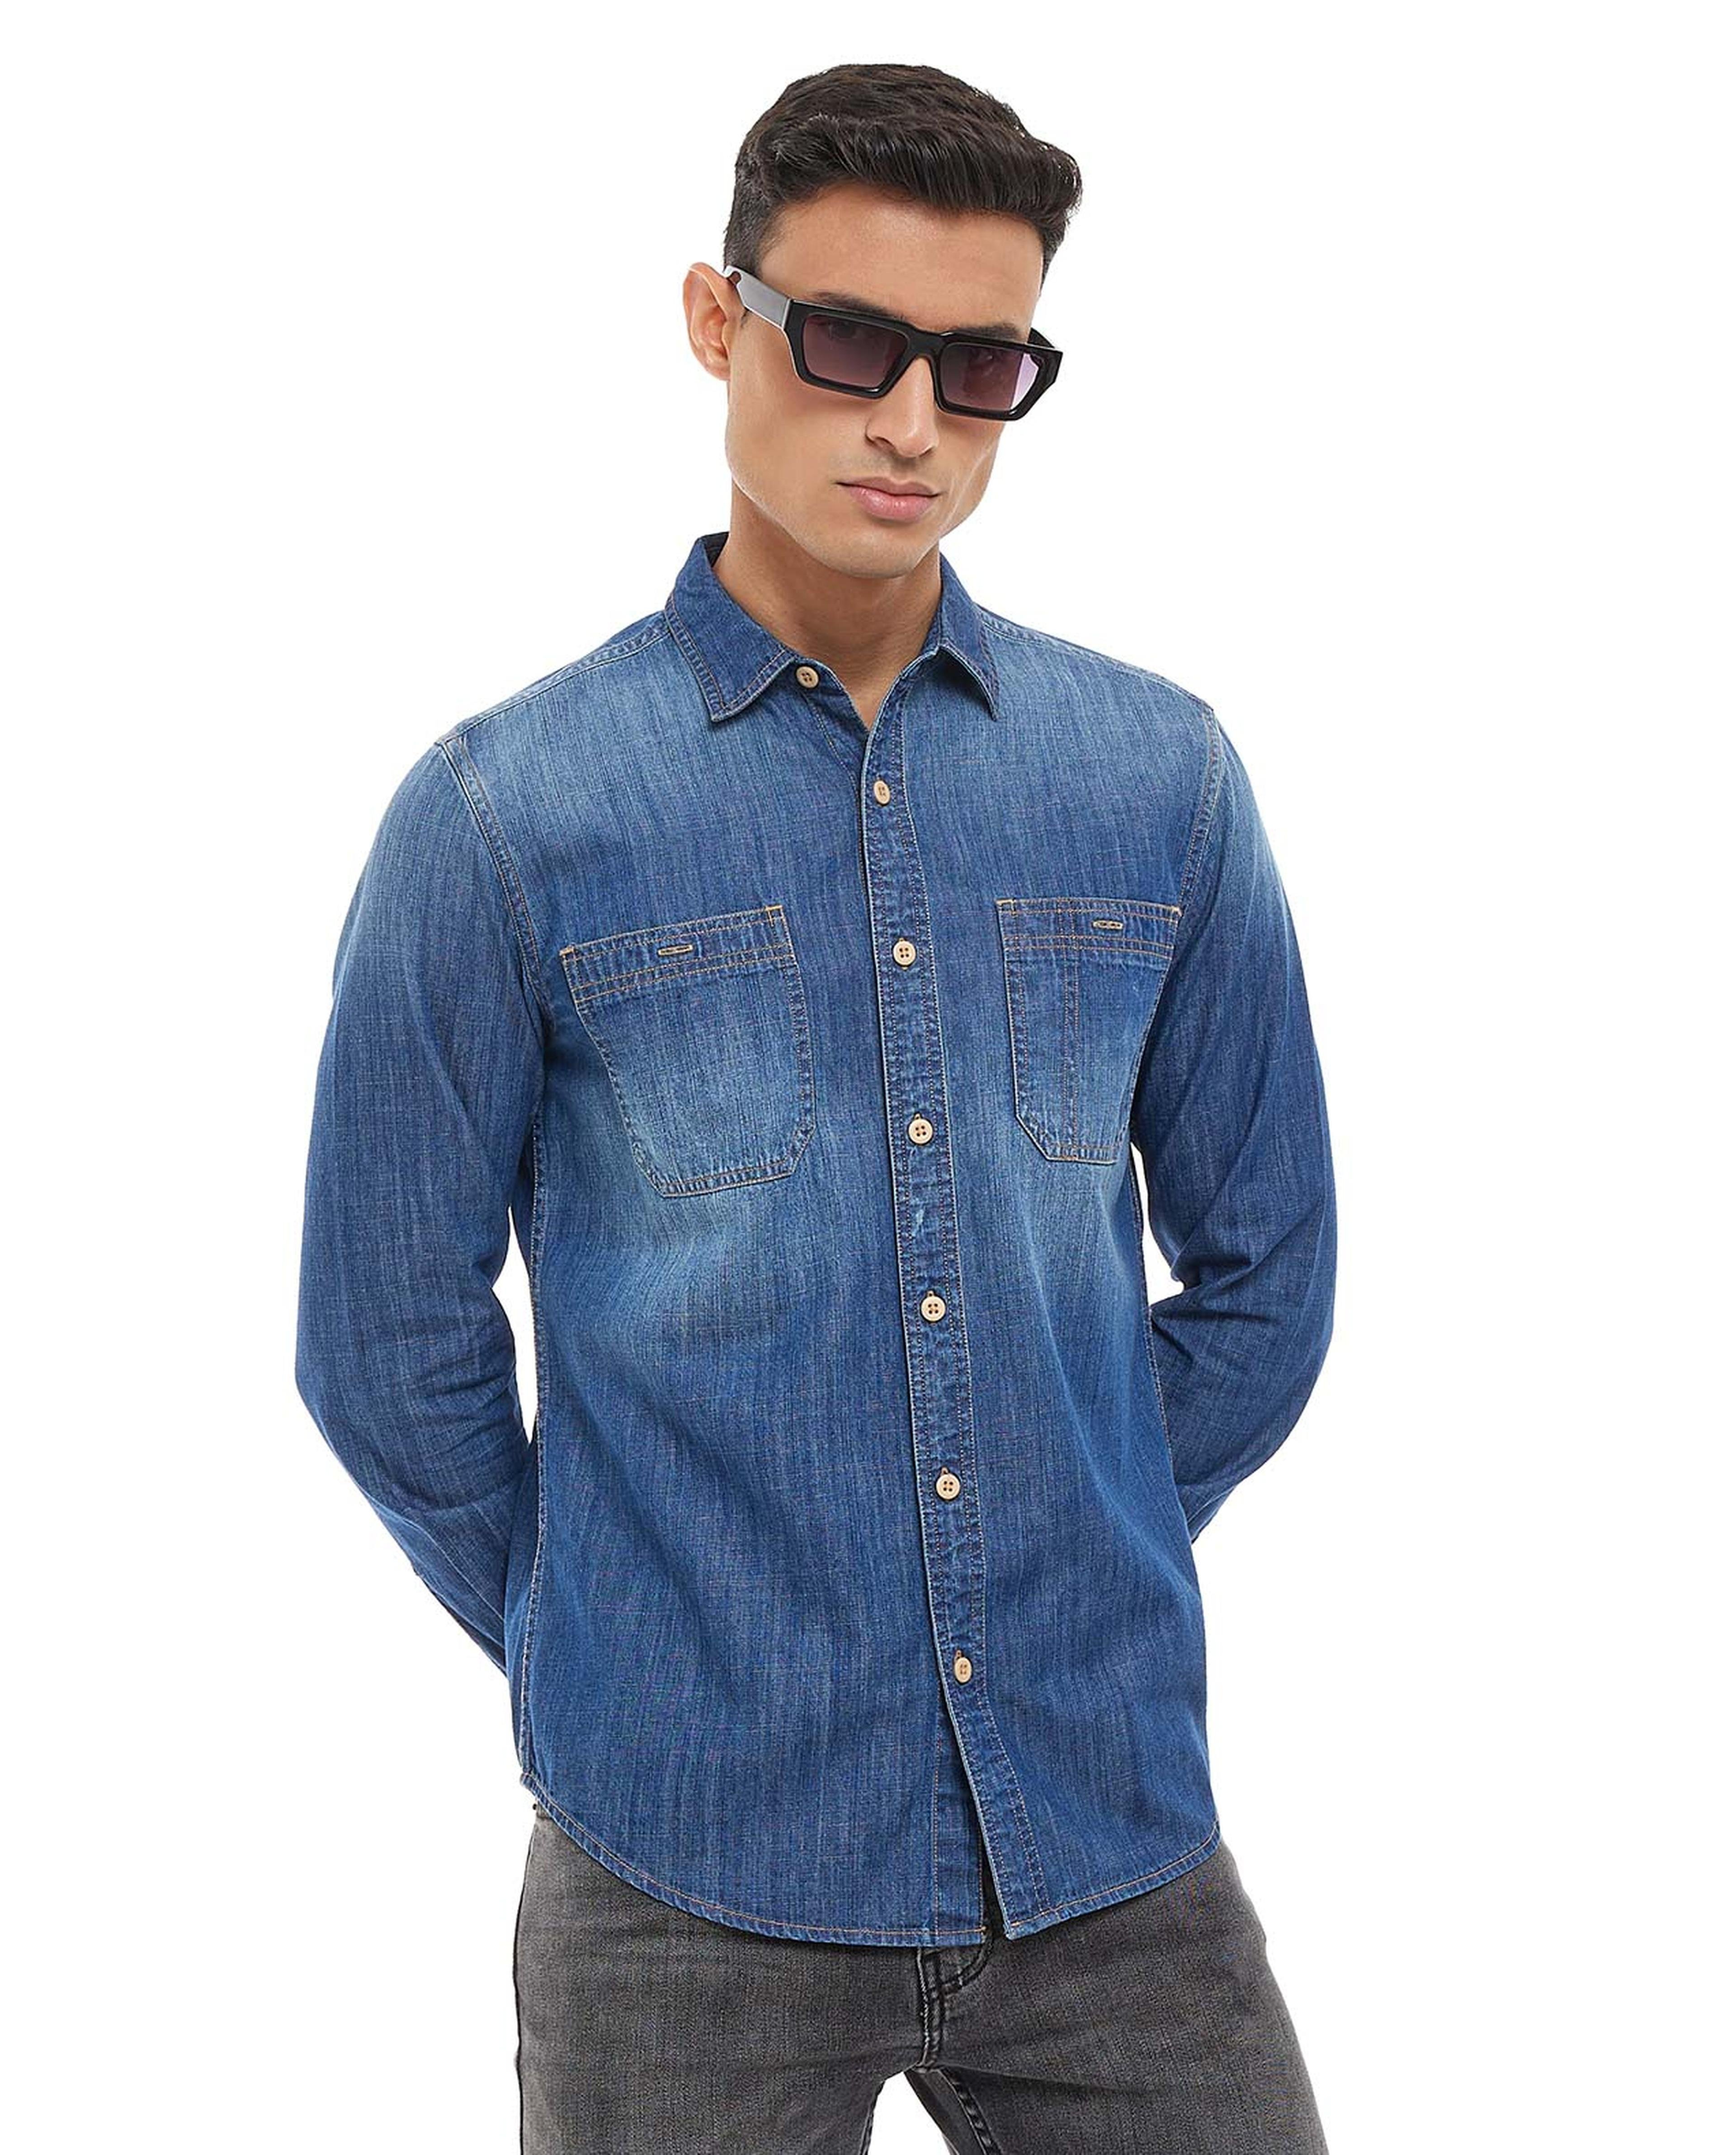 Faded Denim Shirt with Classic Collar and Long Sleeves